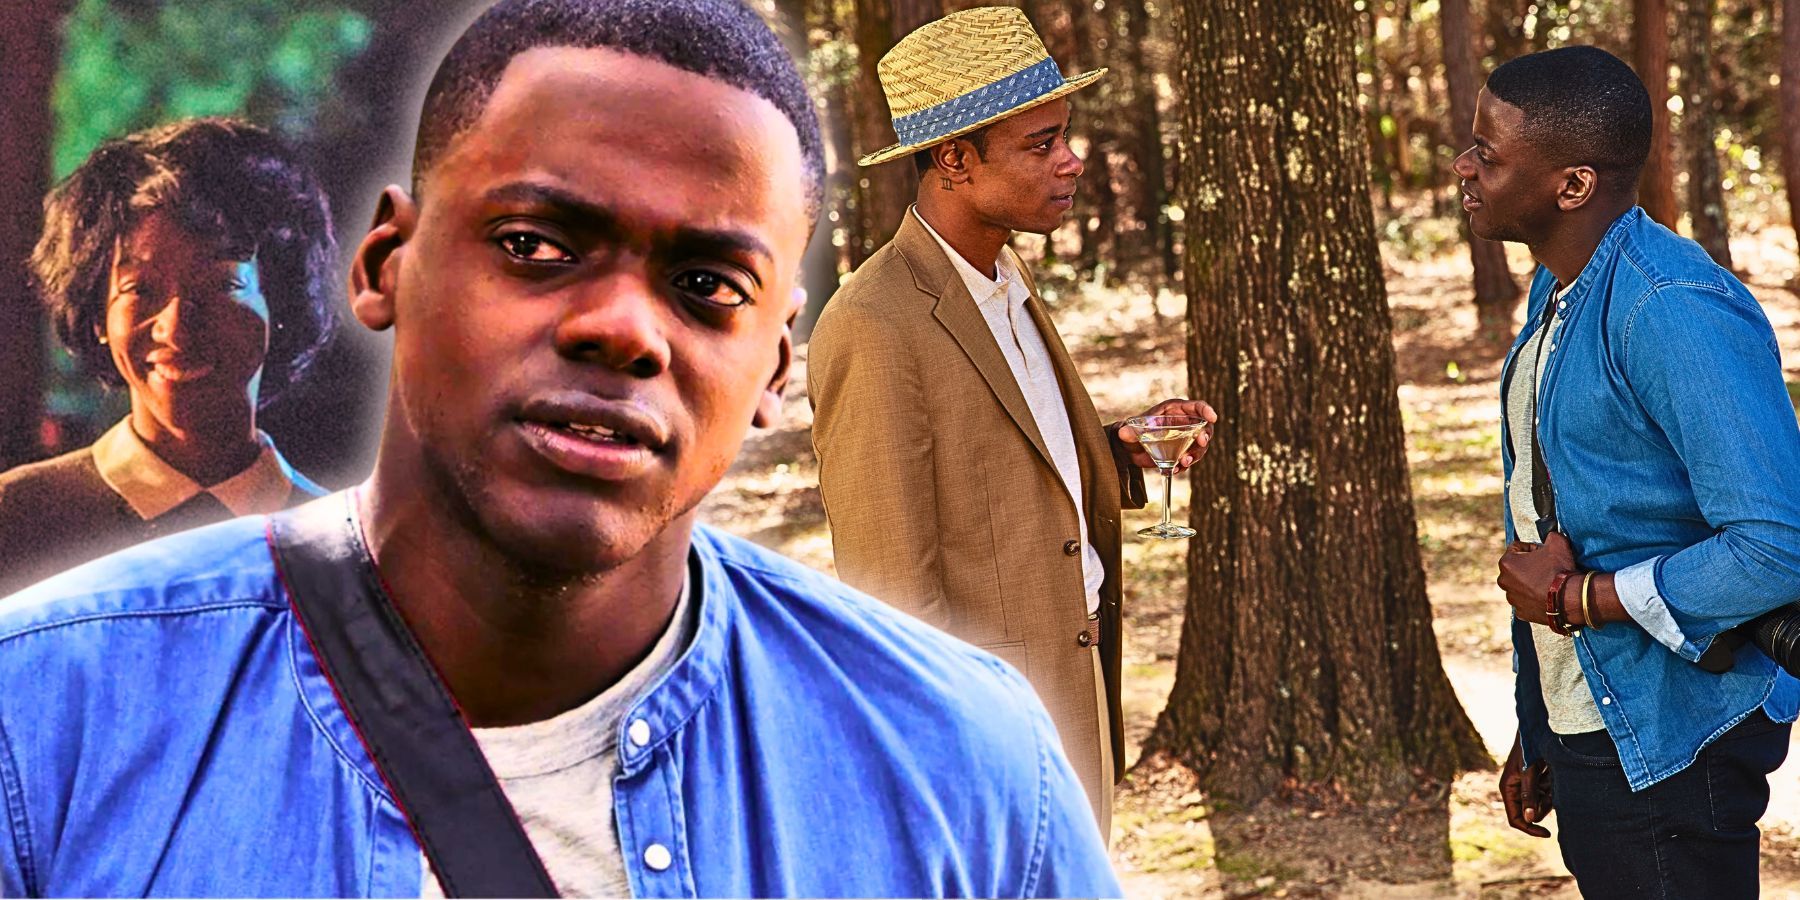 Daniel Kaluuya in Get Out with scenes collaged behind him